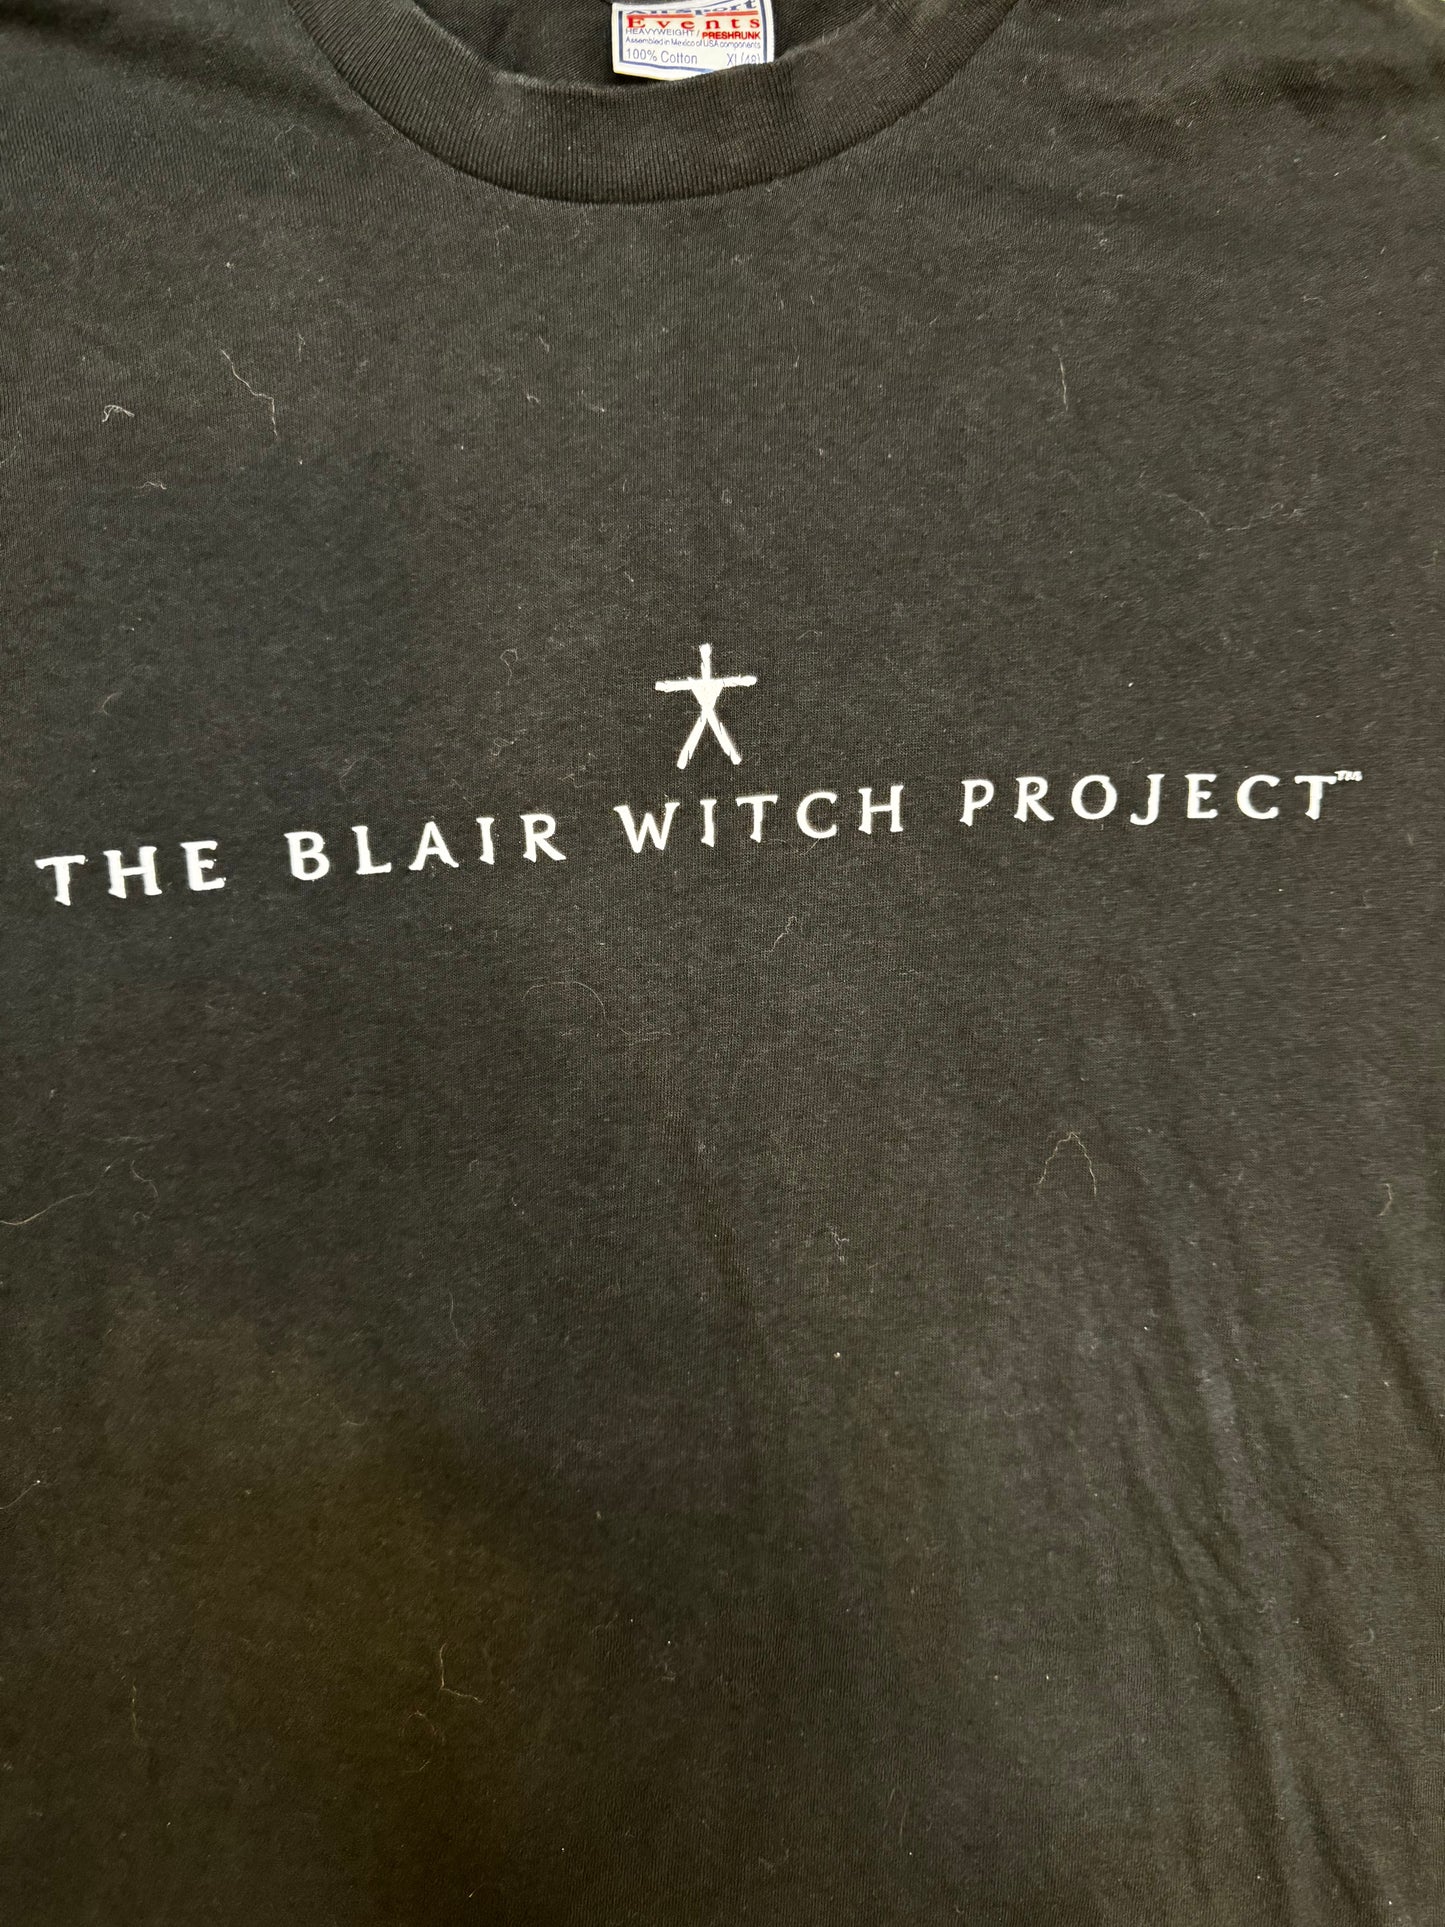 1999 Vintage The Blair Witch Project movie promo T-shirt